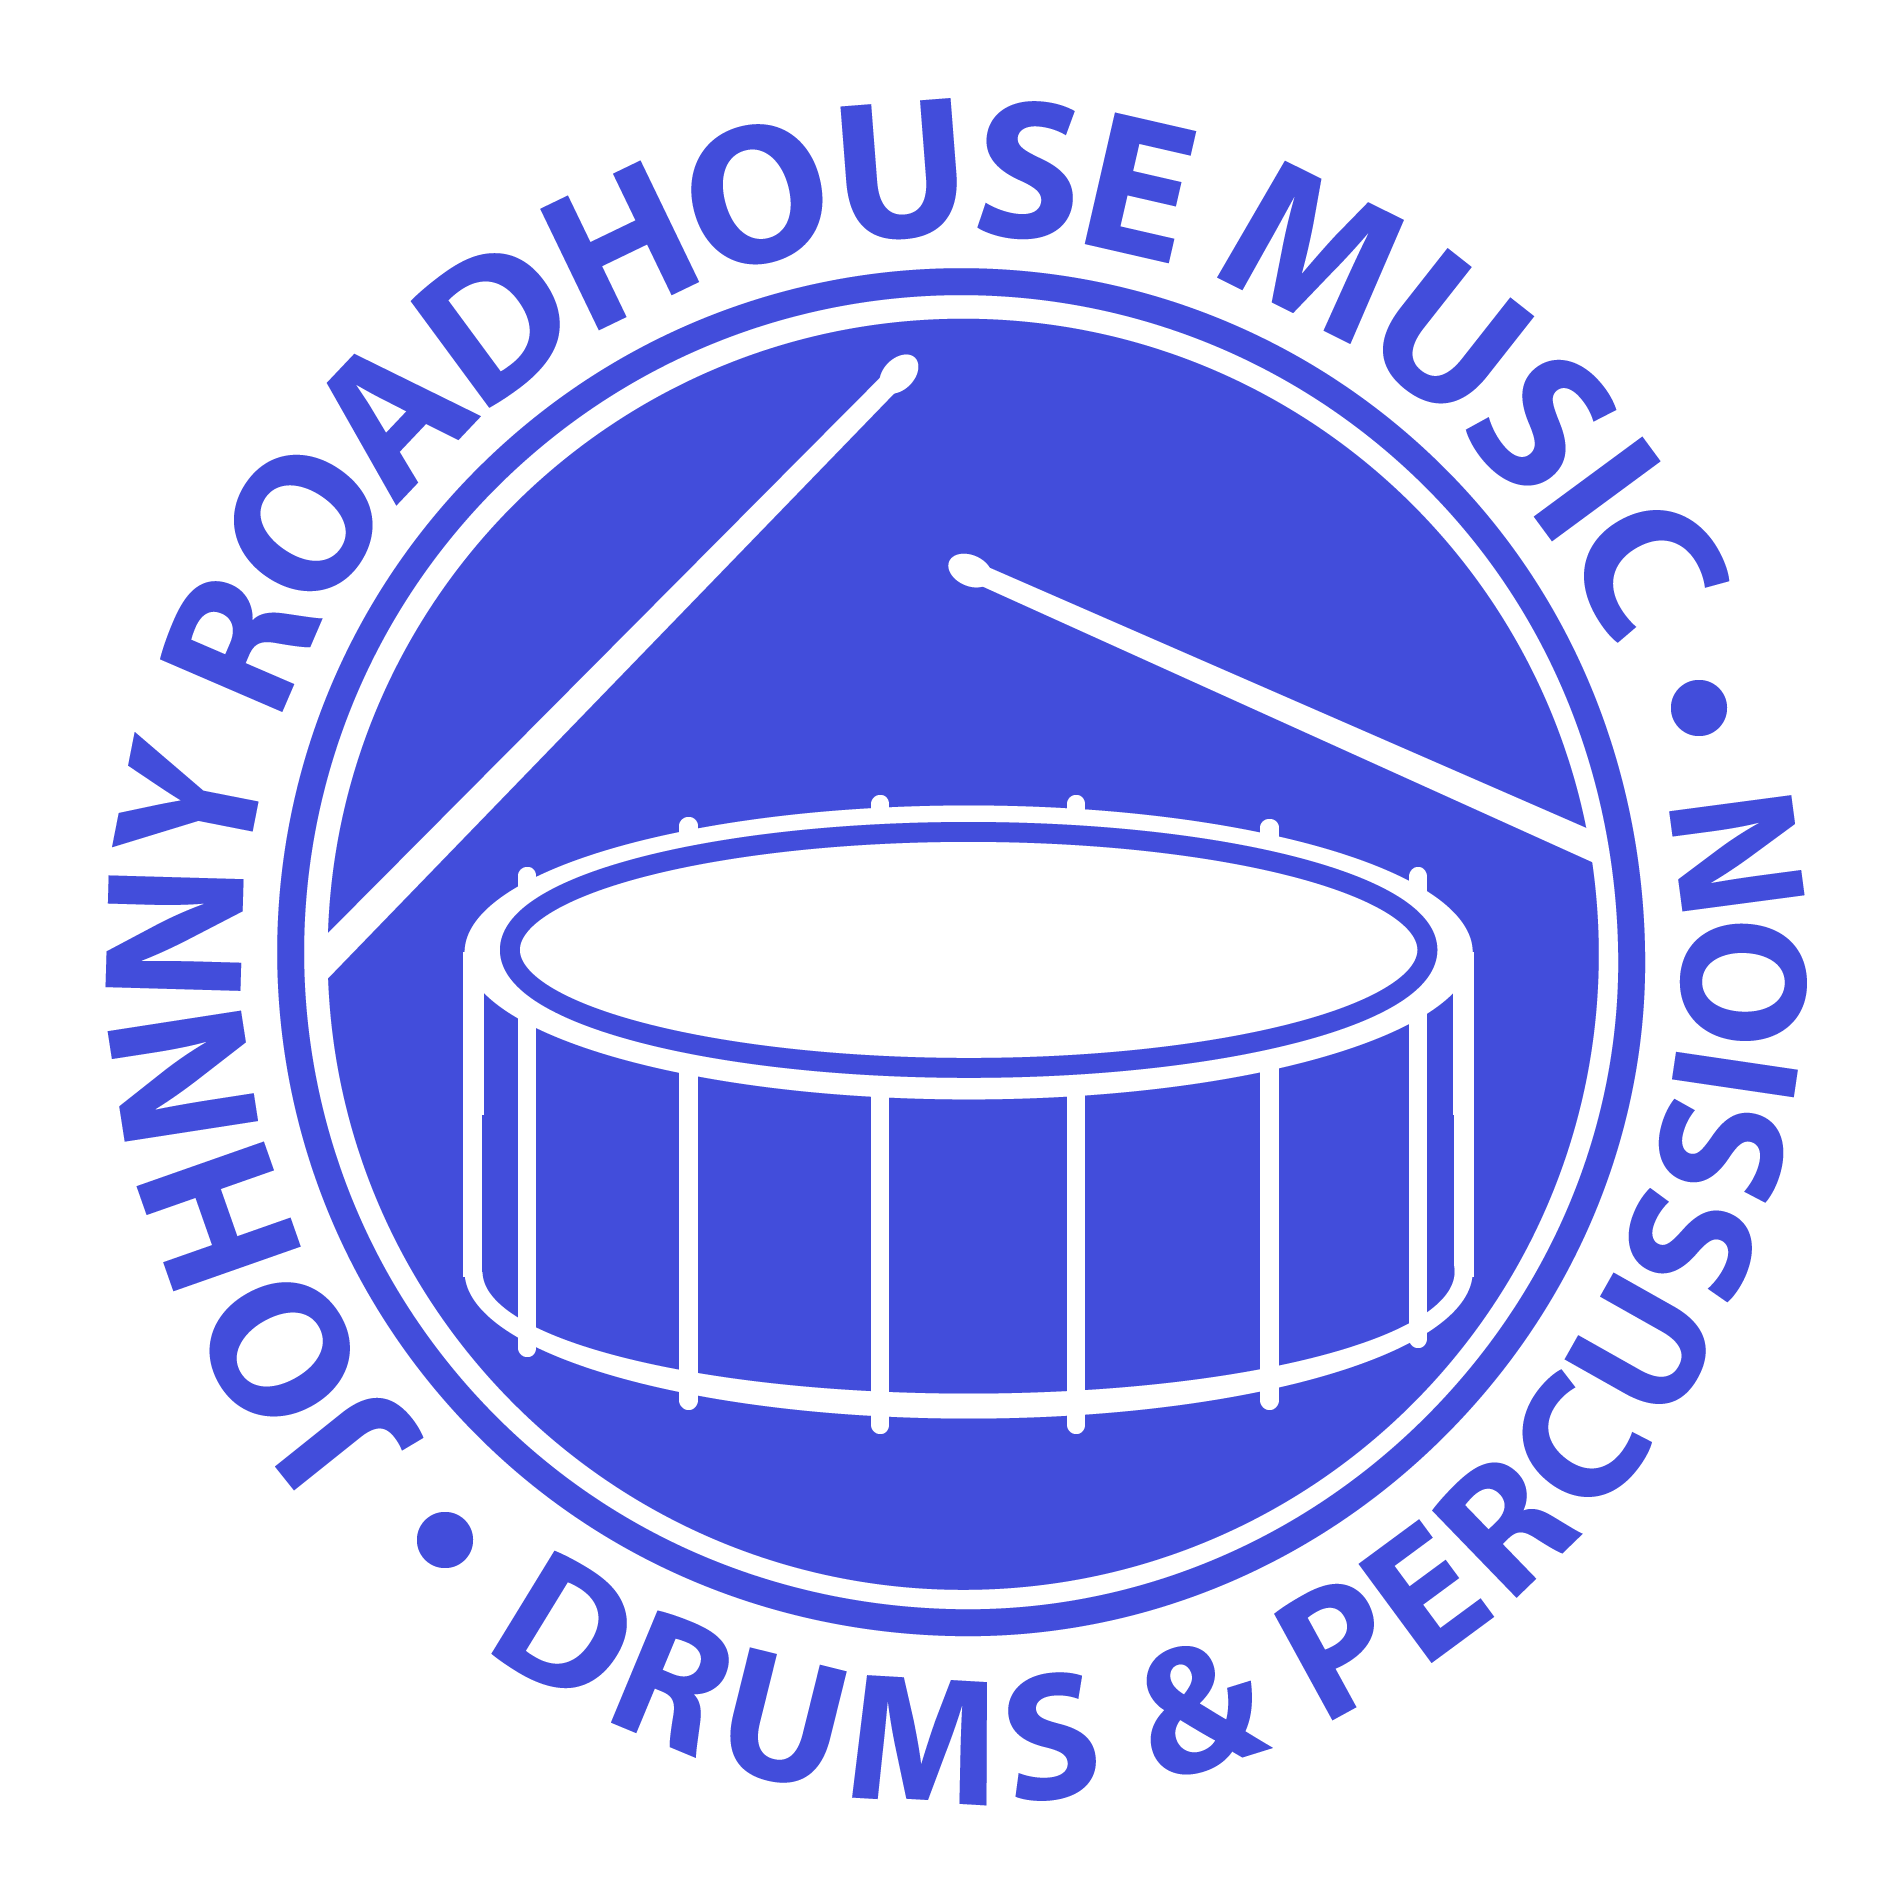 Johnny Roadhouse Music - Drum & Percussion Department